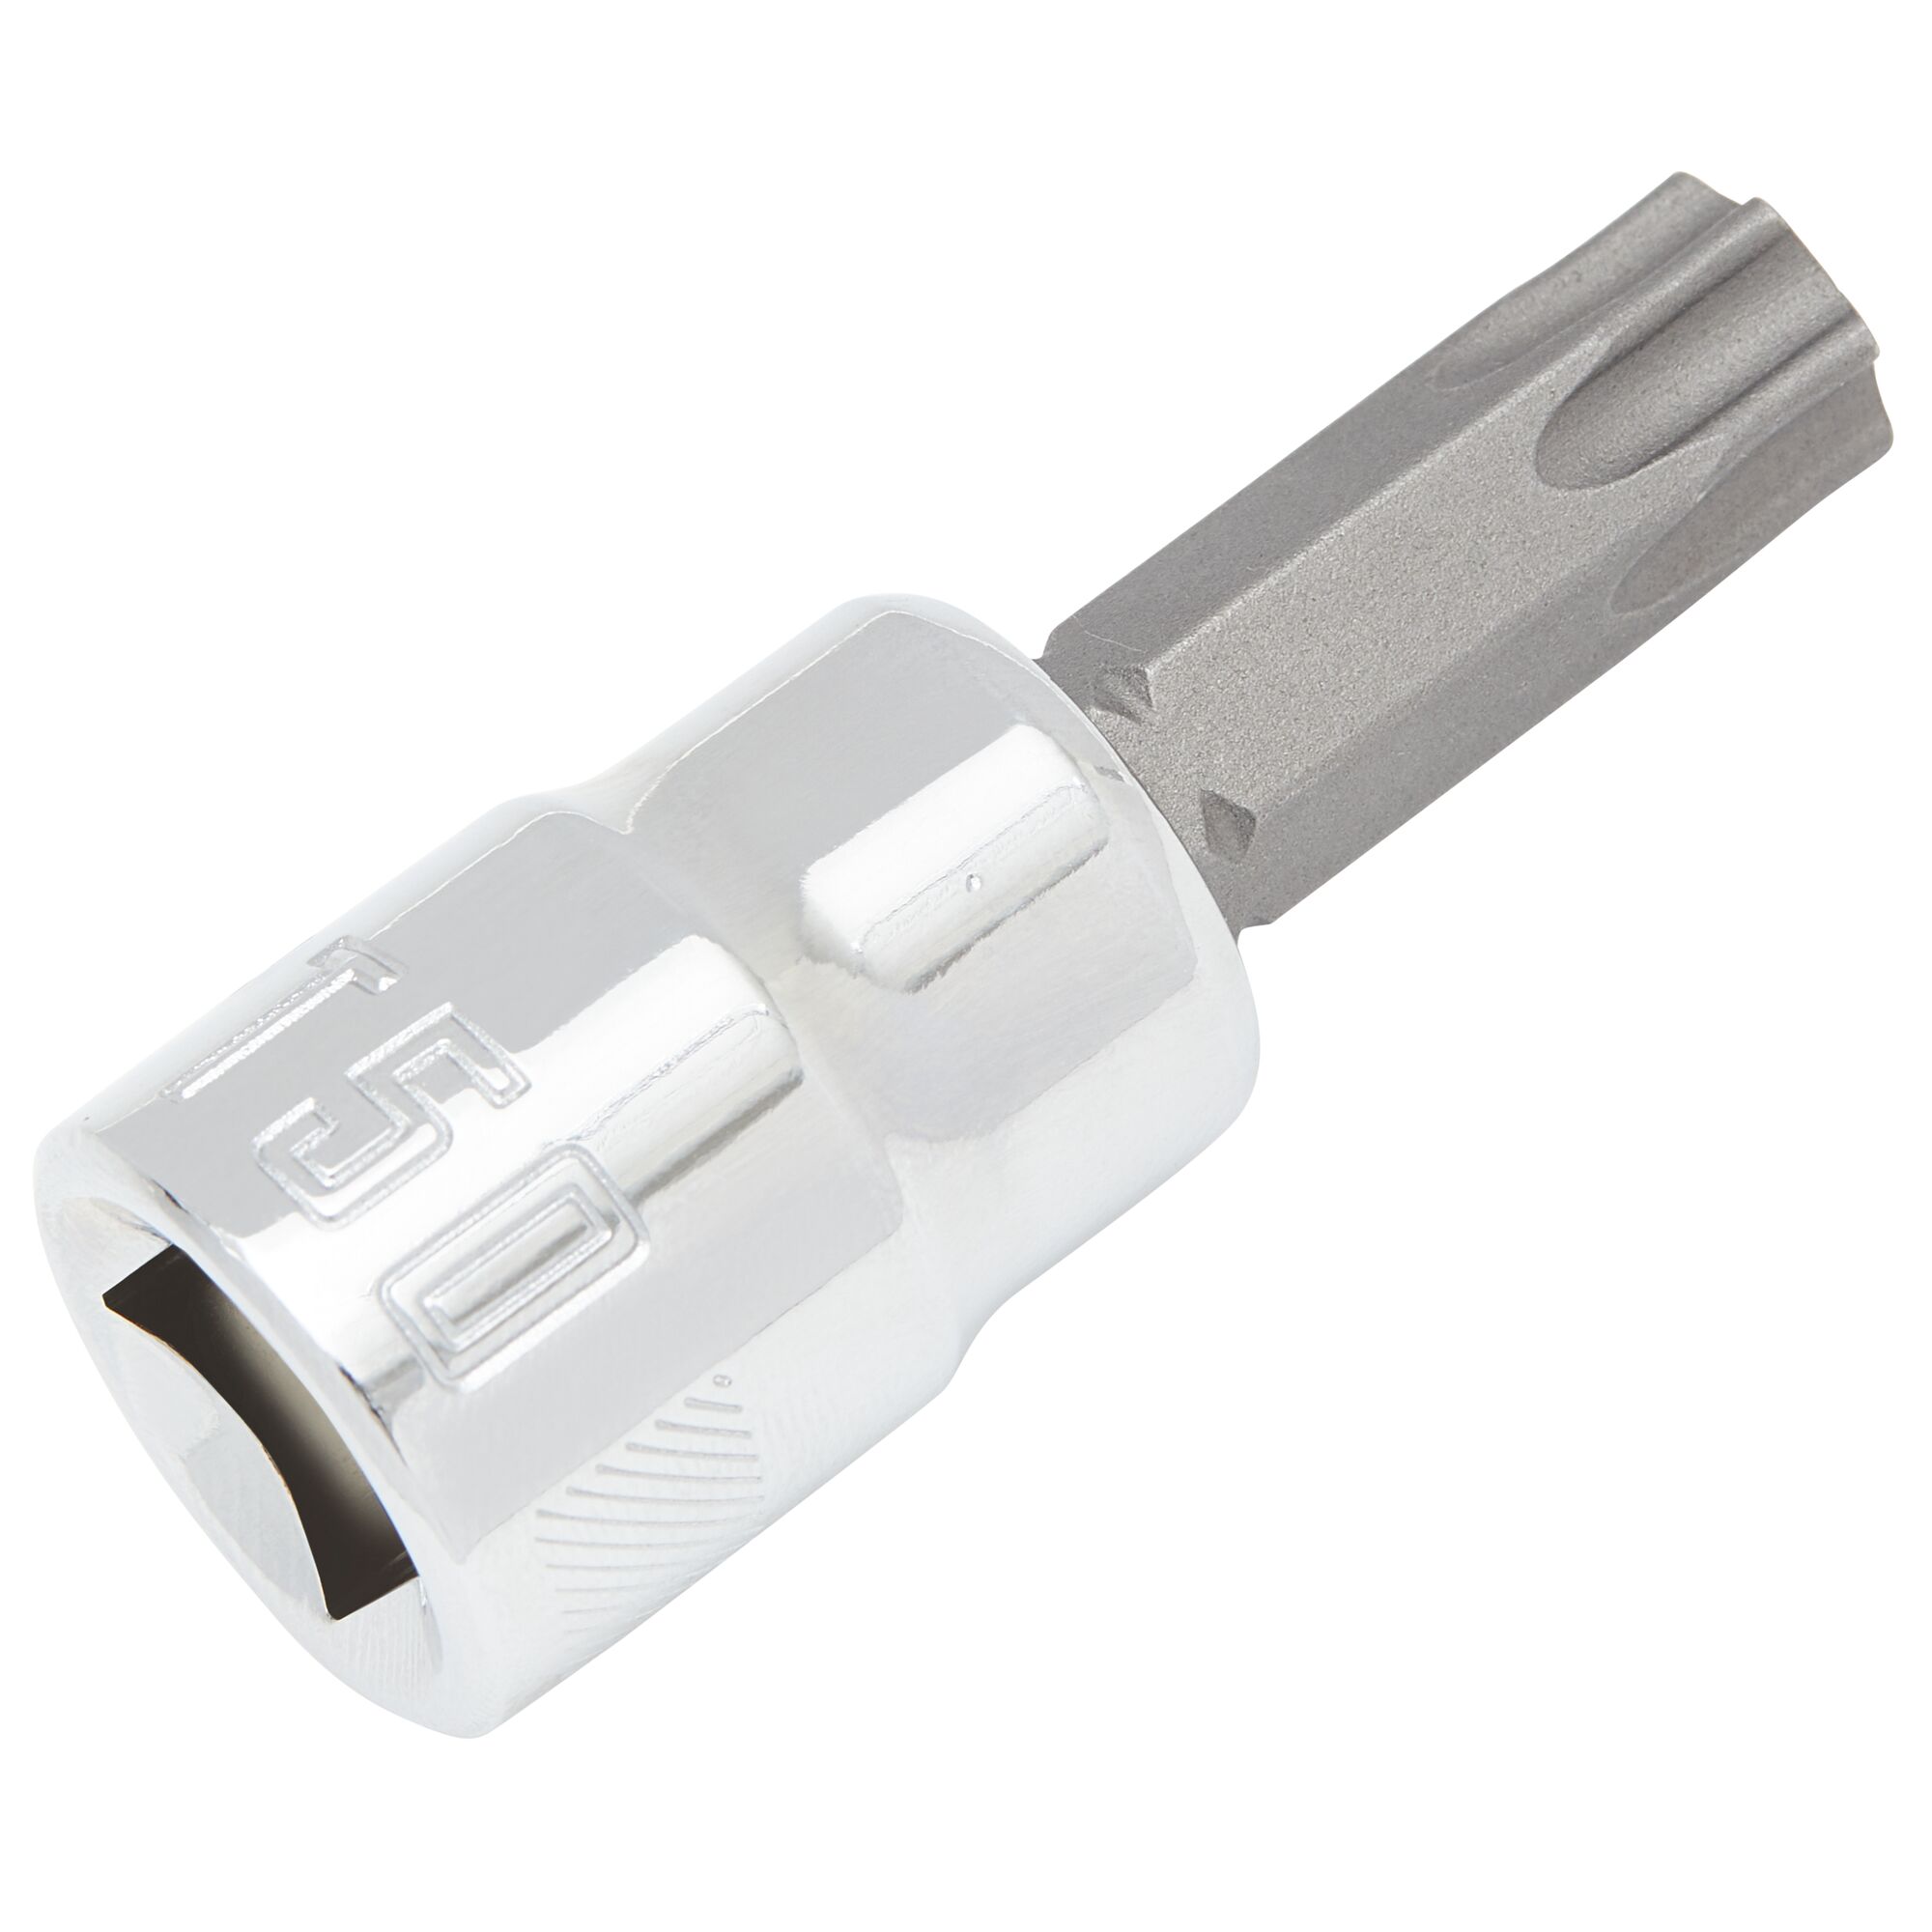 View of CRAFTSMAN Sockets: Torx on white background